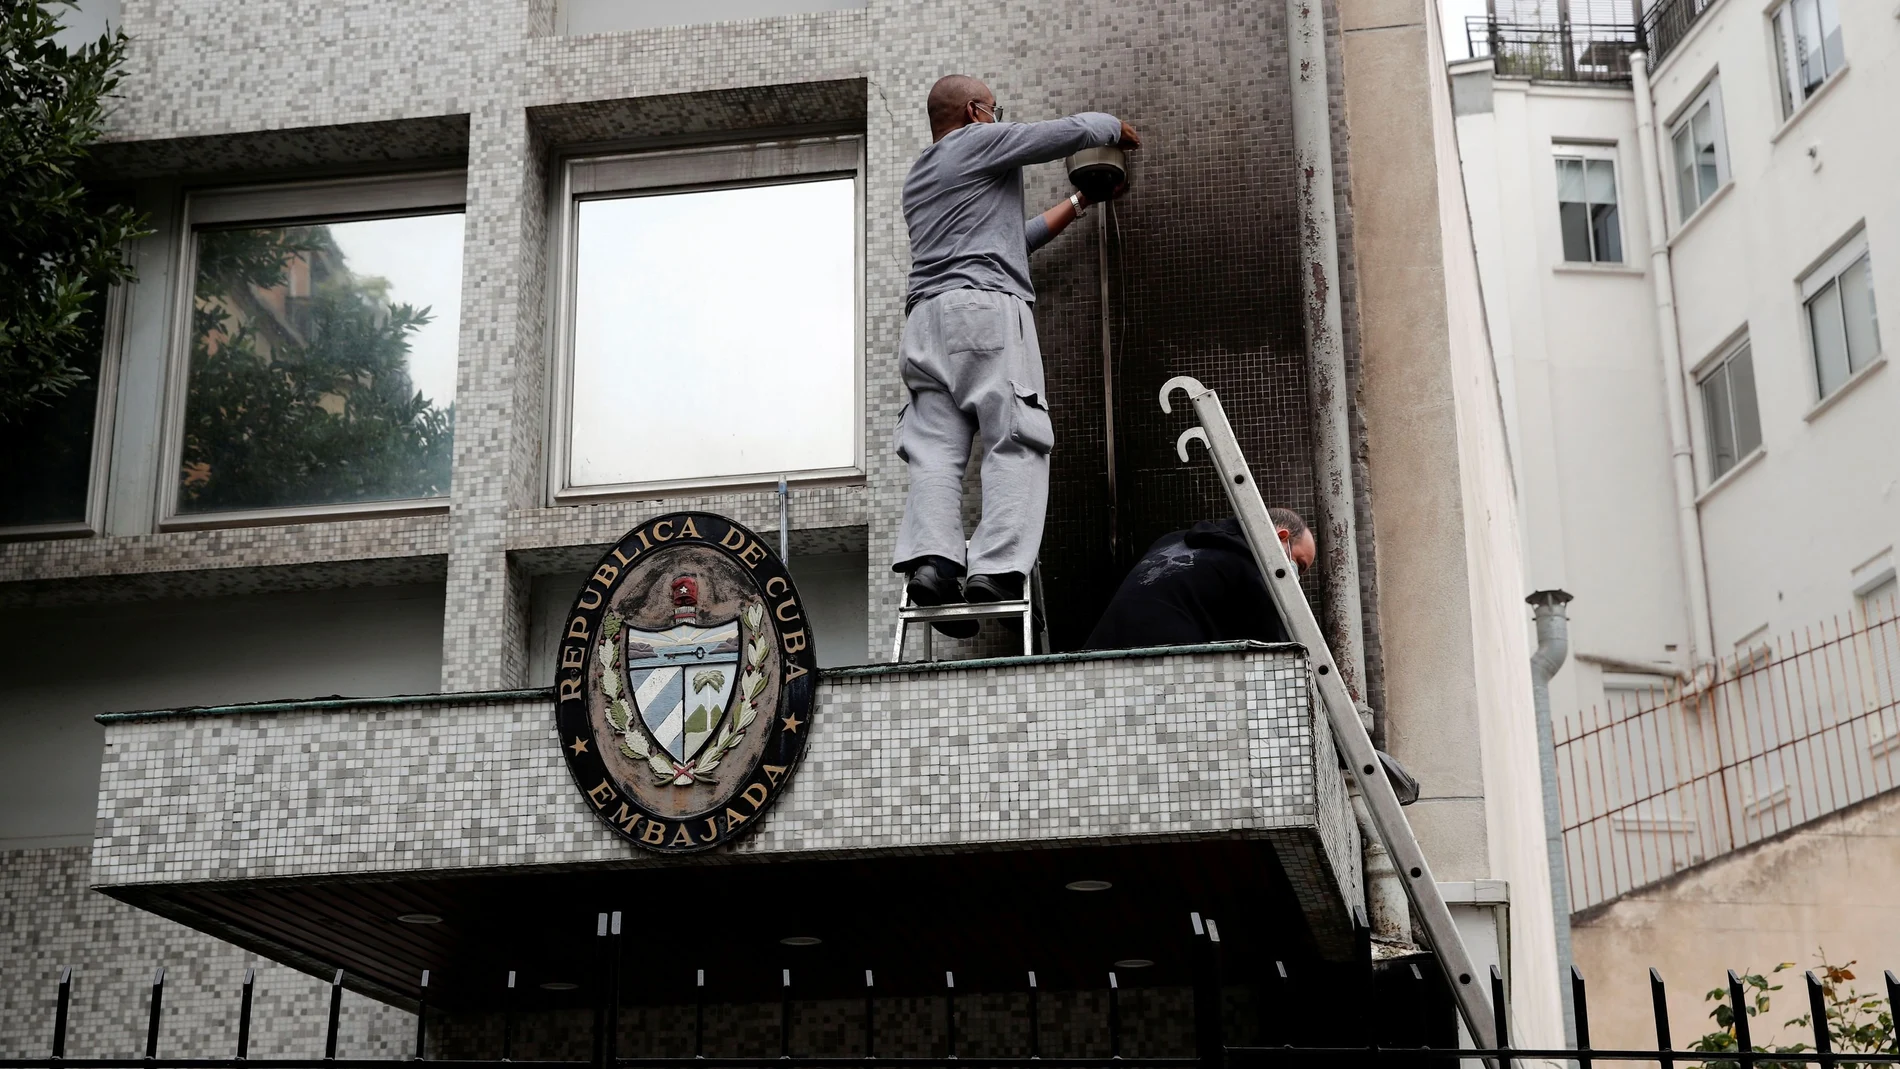 Experts inspect the damage at the Cuban embassy following an overnight petrol bomb attack on its building, in Paris, France July 27, 2021. REUTERS/Benoit Tessier